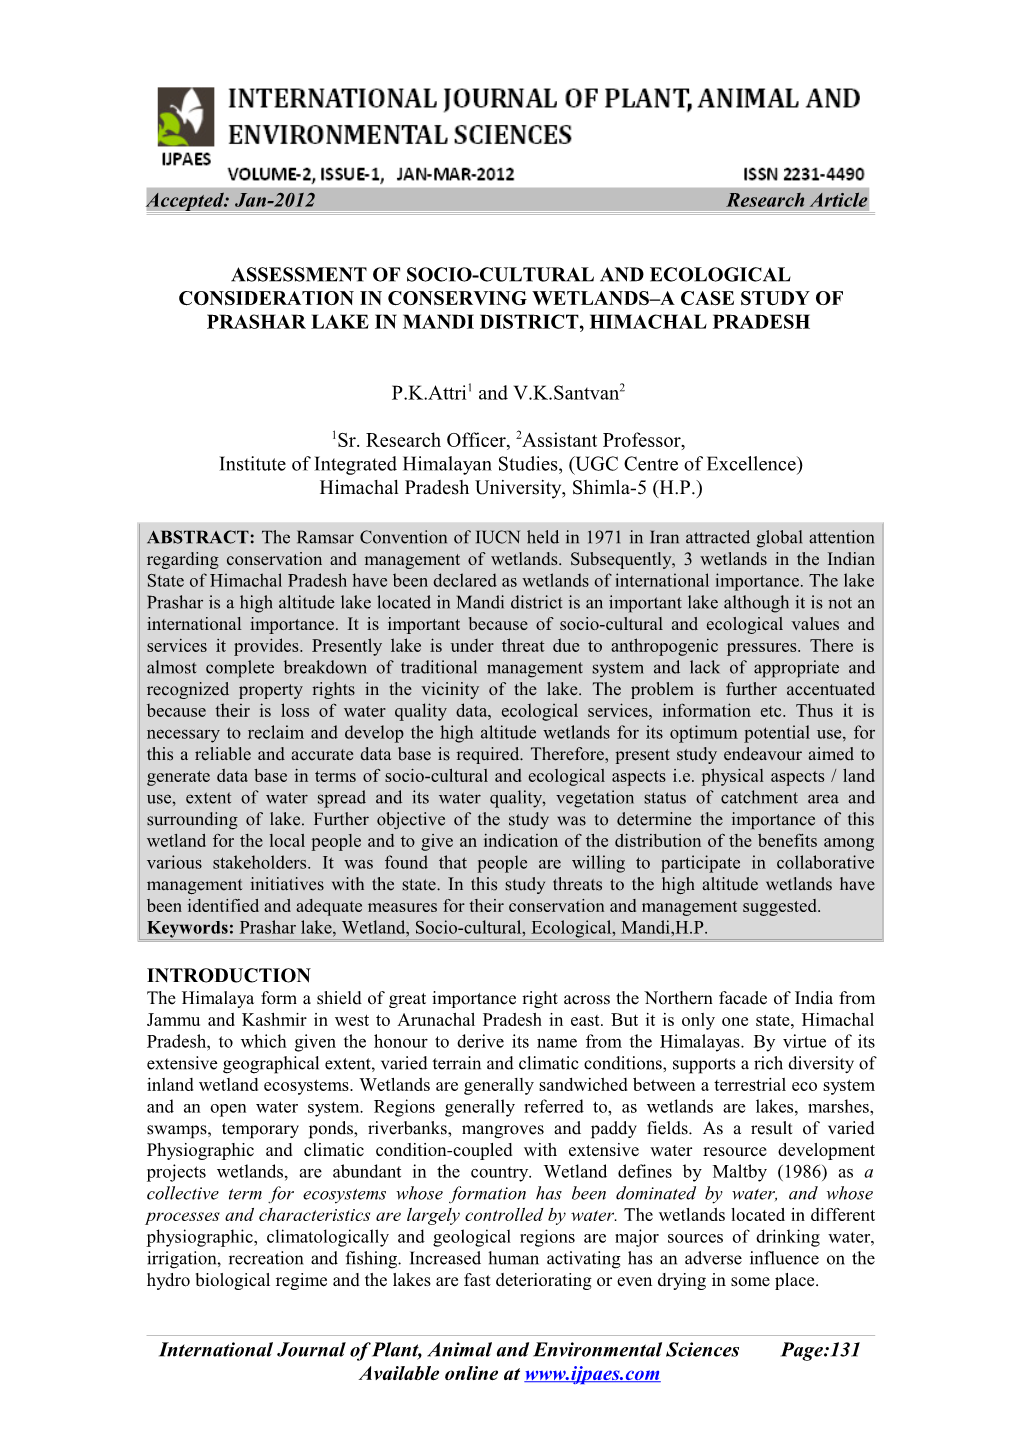 Assessment of Socio-Cultural and Ecological Aspects of Wetland–A